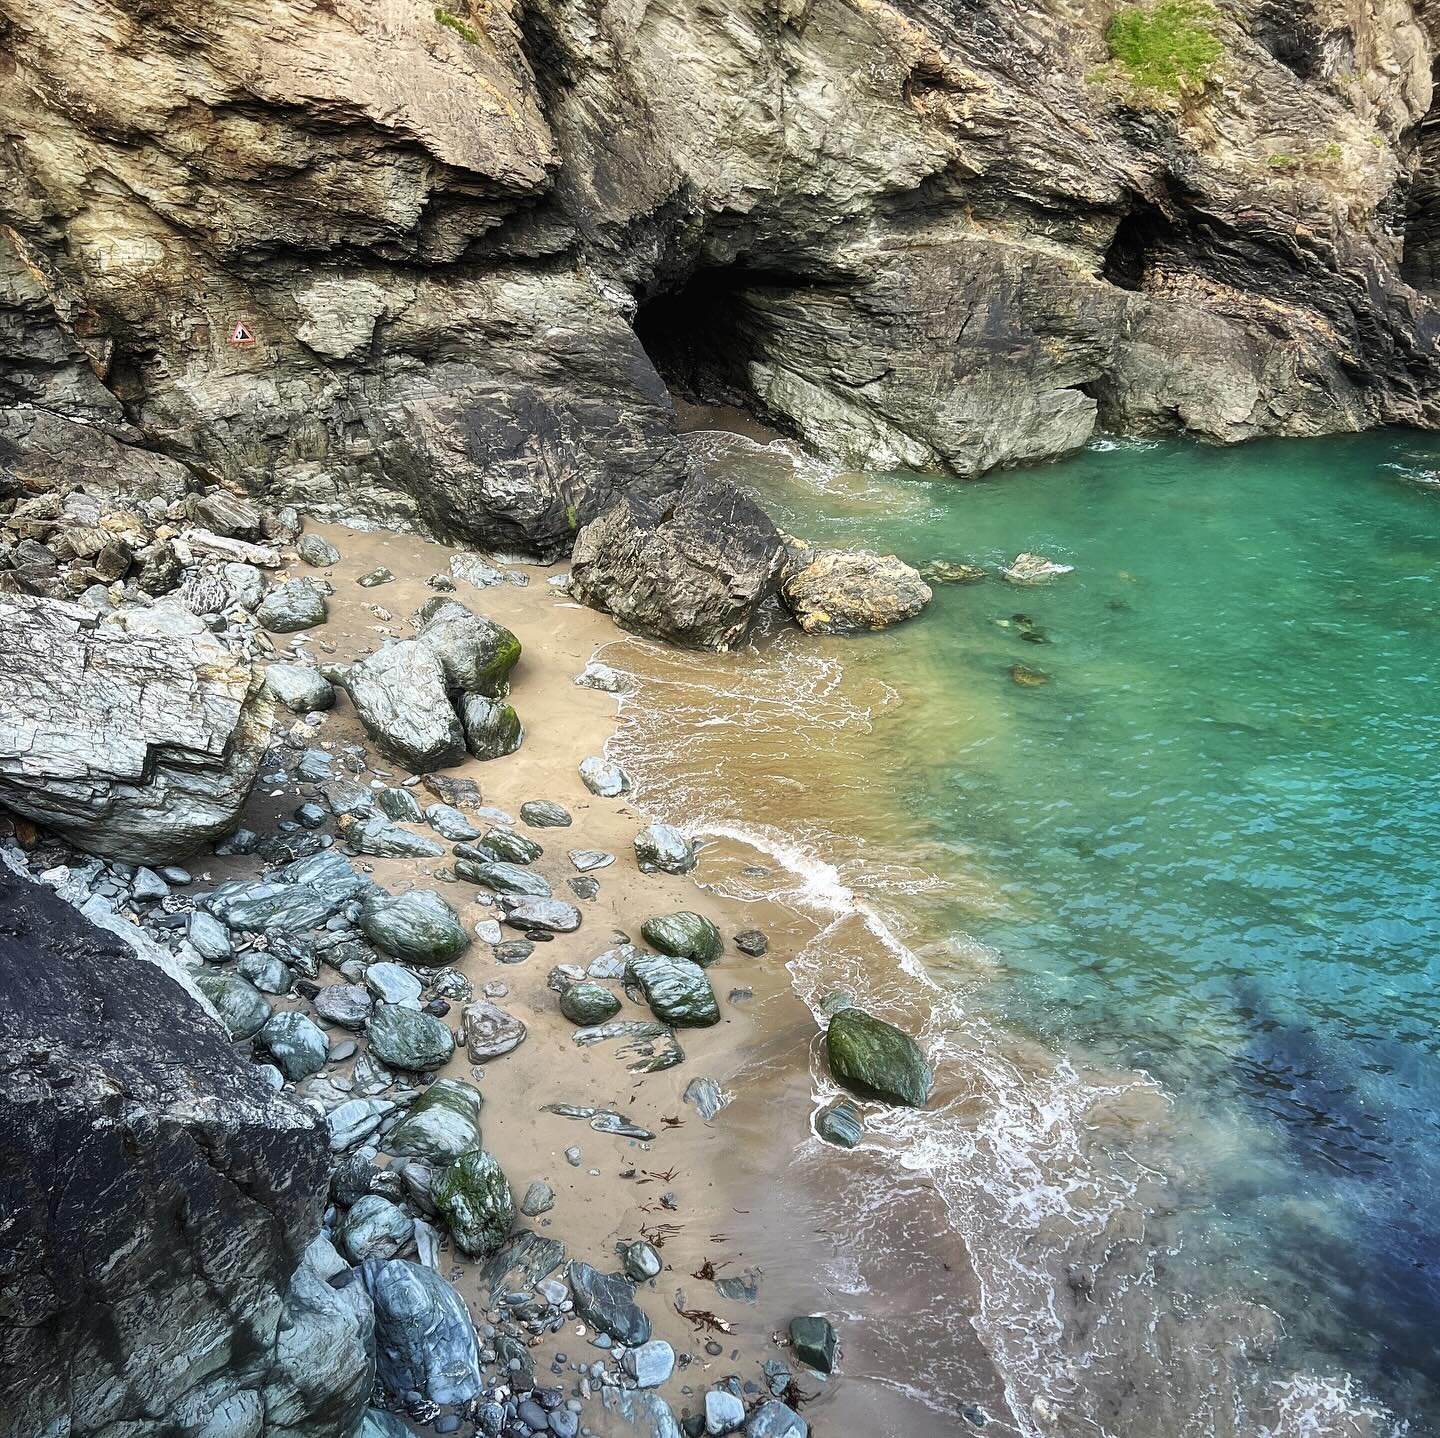 Tintagel, legendary place where King Arthur was conceived. The tide was too high for us to go inside Merlin&rsquo;s Cave but were still able to visit the Tintagel Castle beach #tintagel